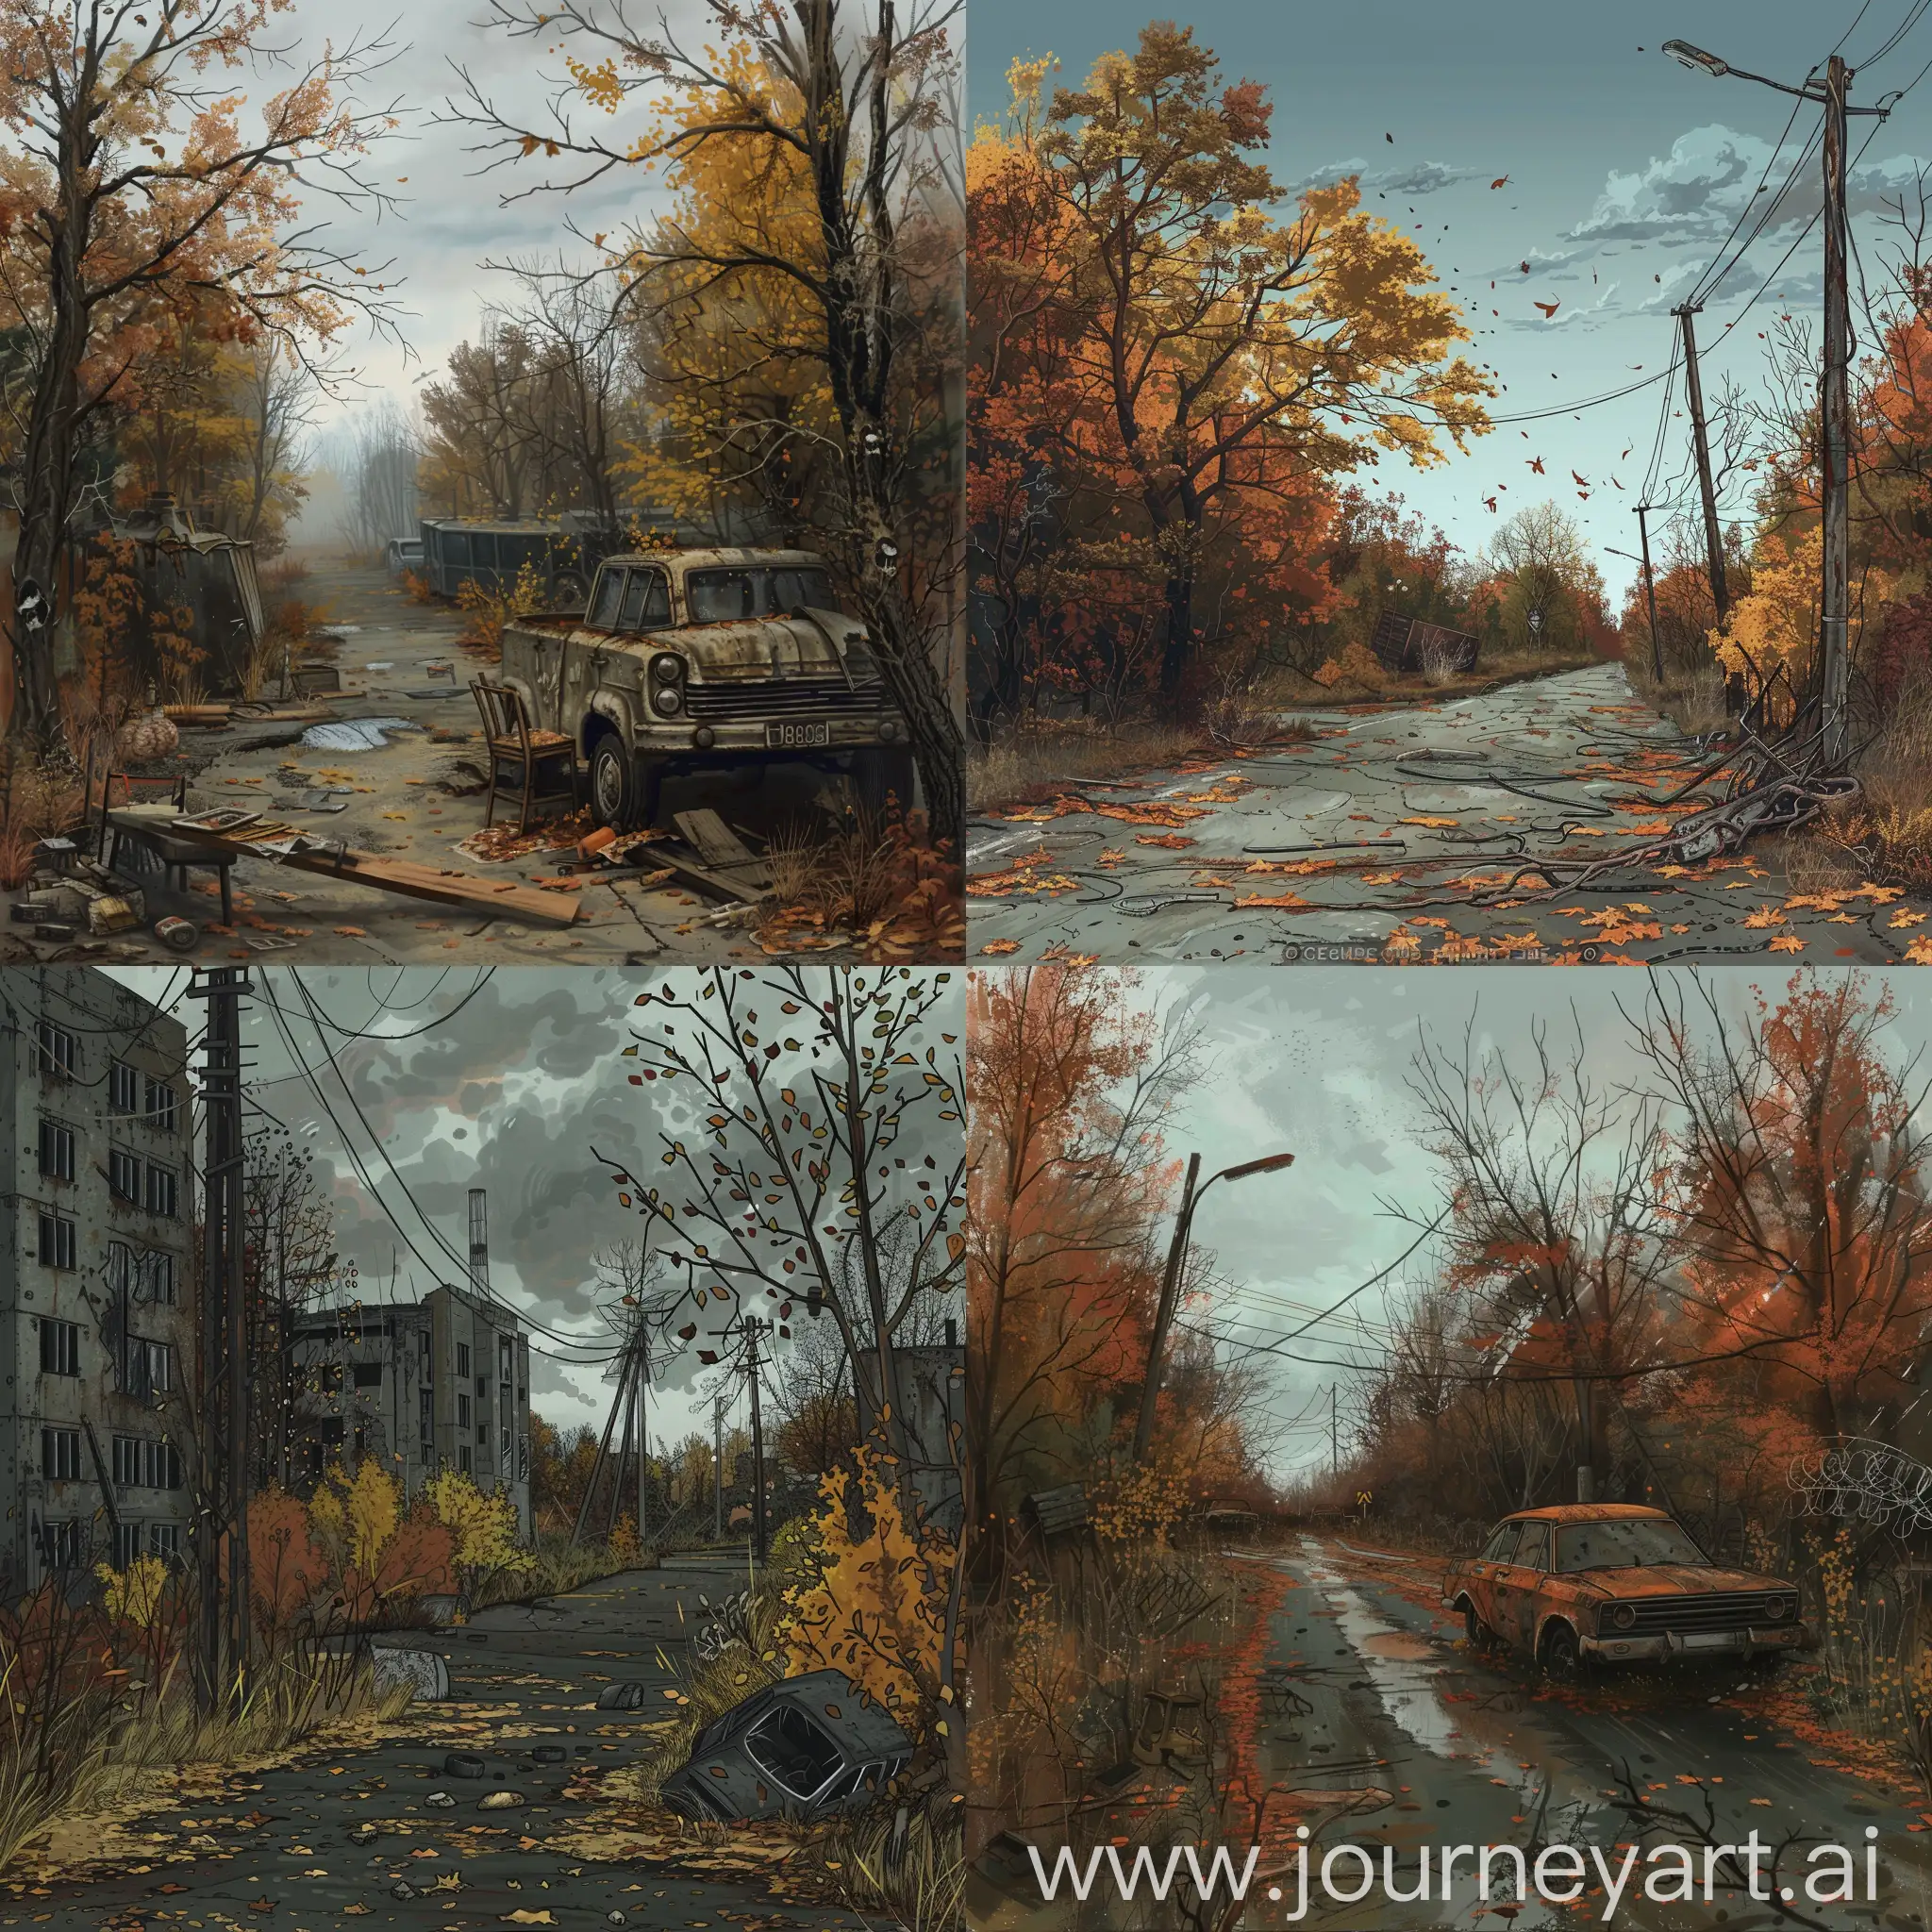 Draw illustrations for an rpg game based on the book by the Strugatsky brothers "Picnic on the side of the Road", draw a dangerous zone in an abandoned Chernobyl, where radiation is raging, gloomy autumn, the style of illustration of the 80s.